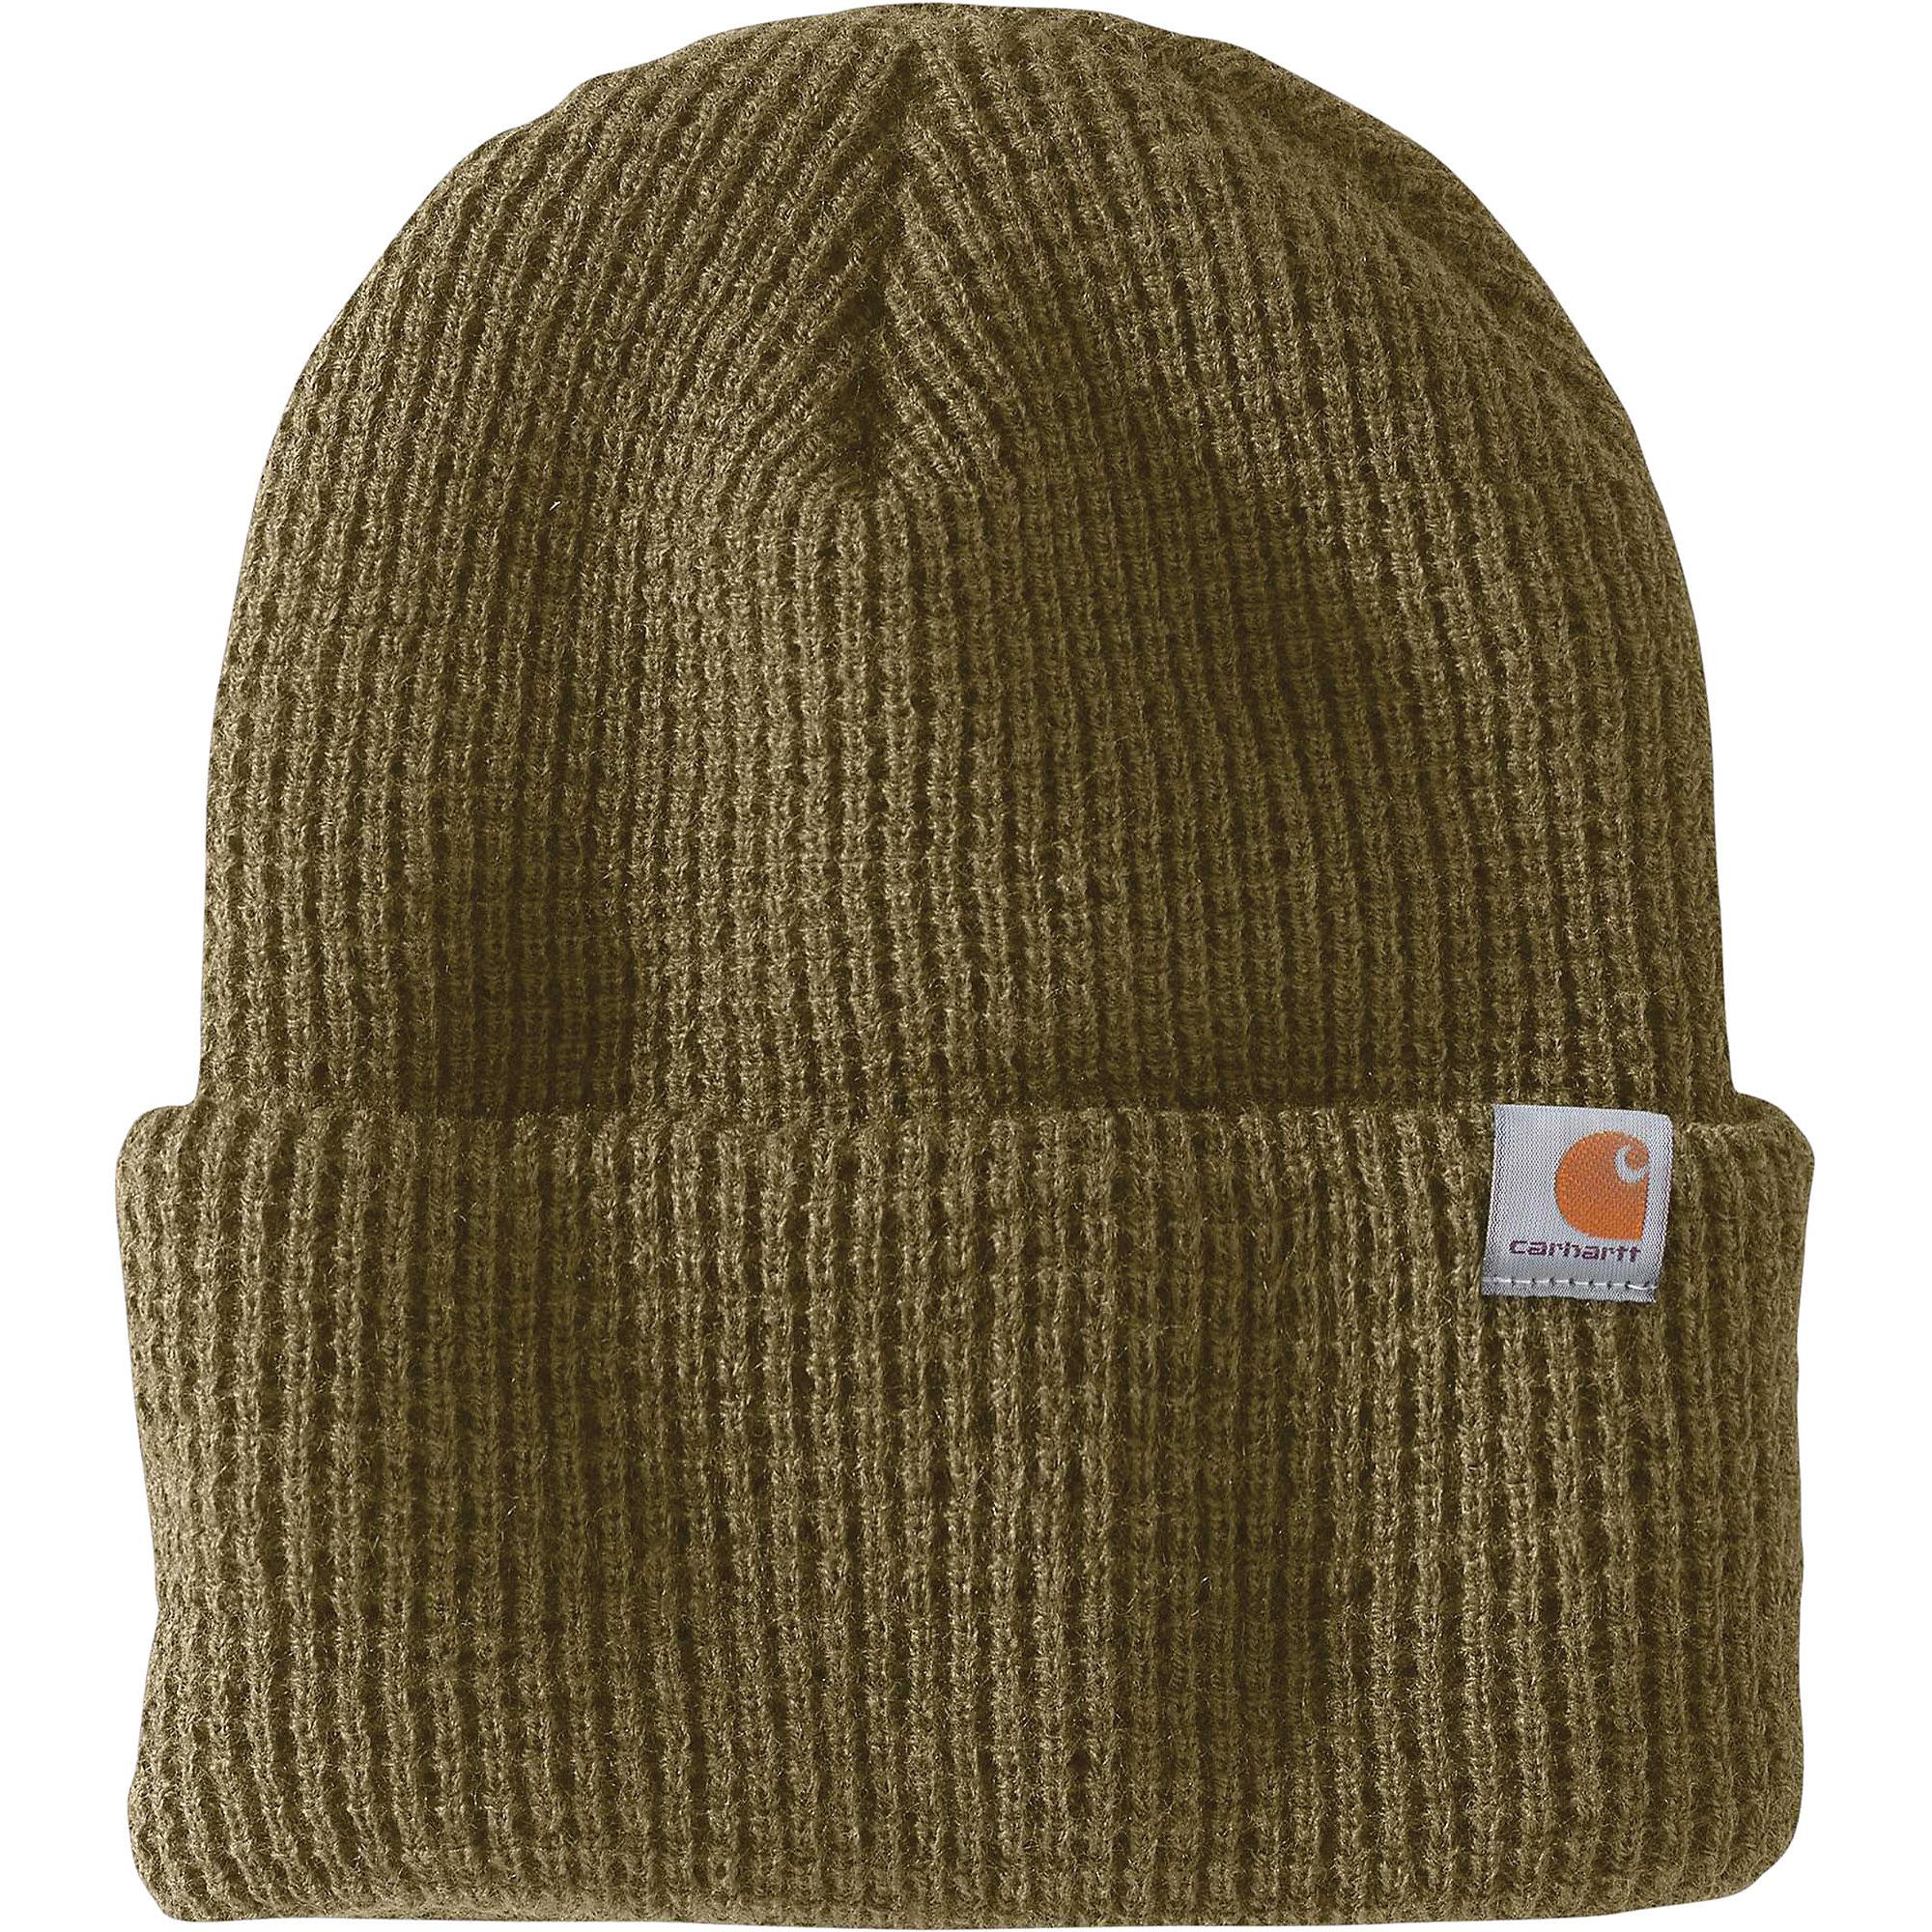 Carhartt Synthetic Woodside Hat in Military Olive (Green) for Men - Lyst